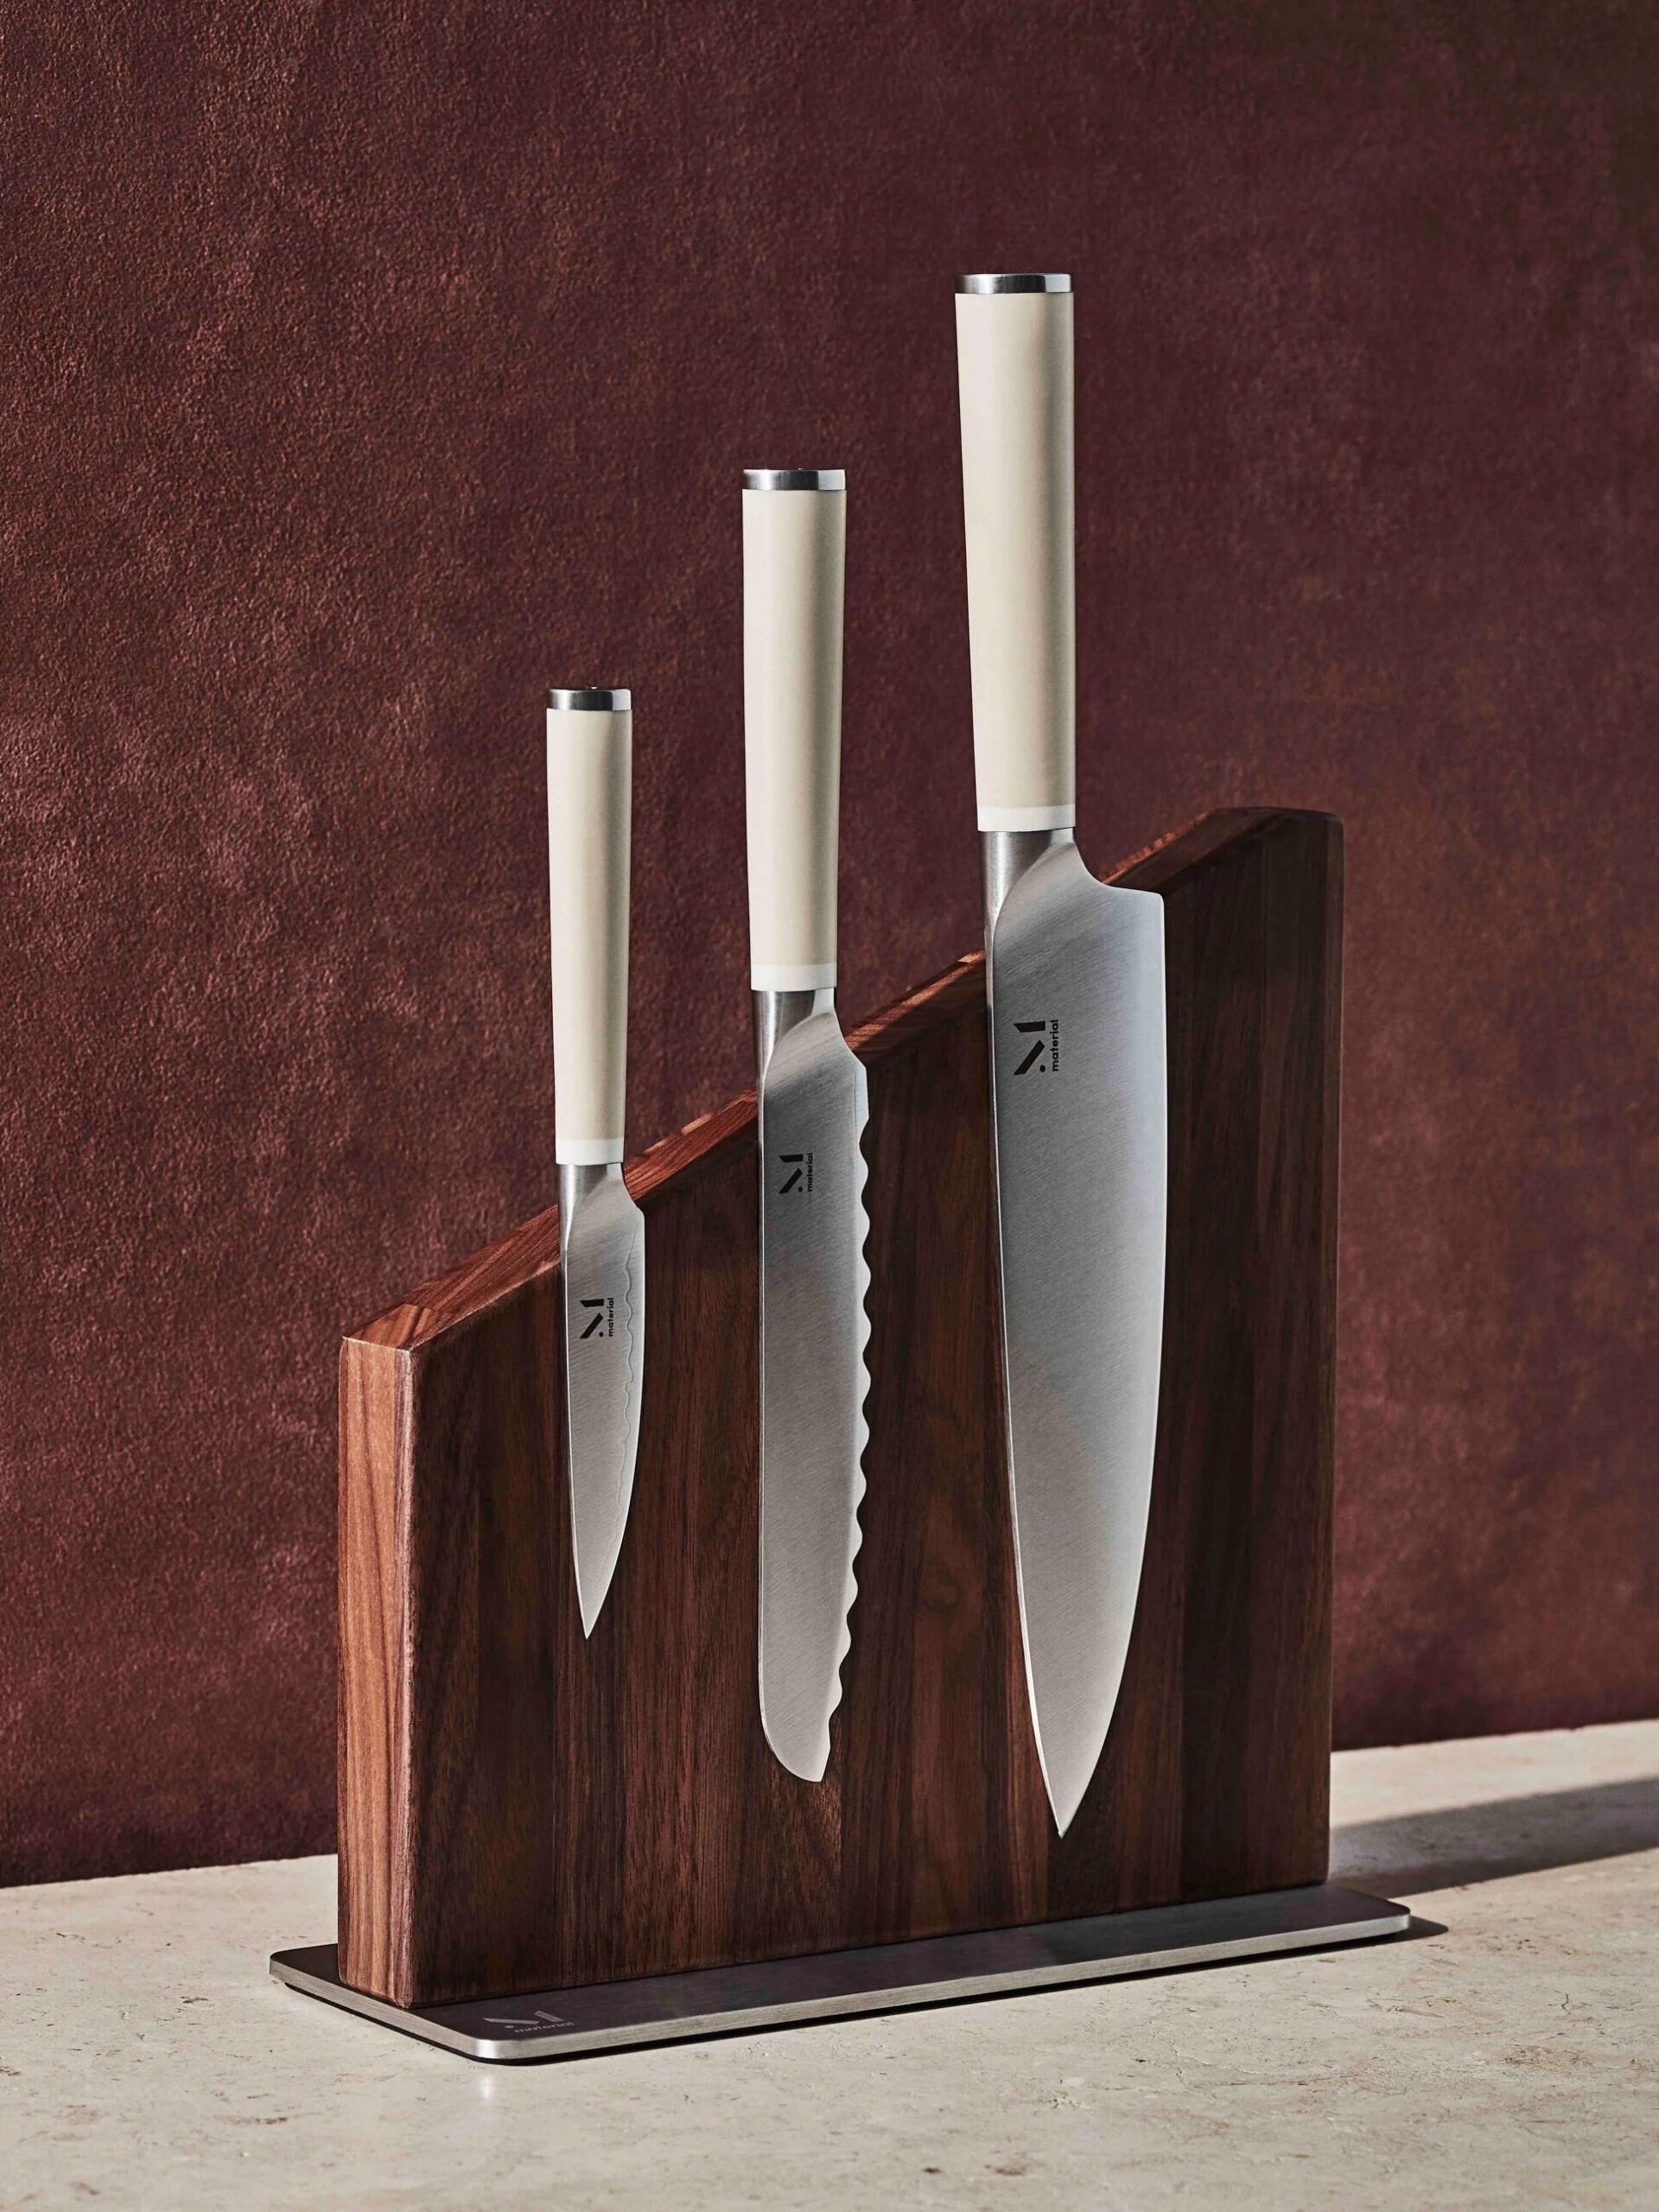 A set of three stainless steel kitchen knives with white handles, displayed upright in a dark wooden block on a textured brown background.